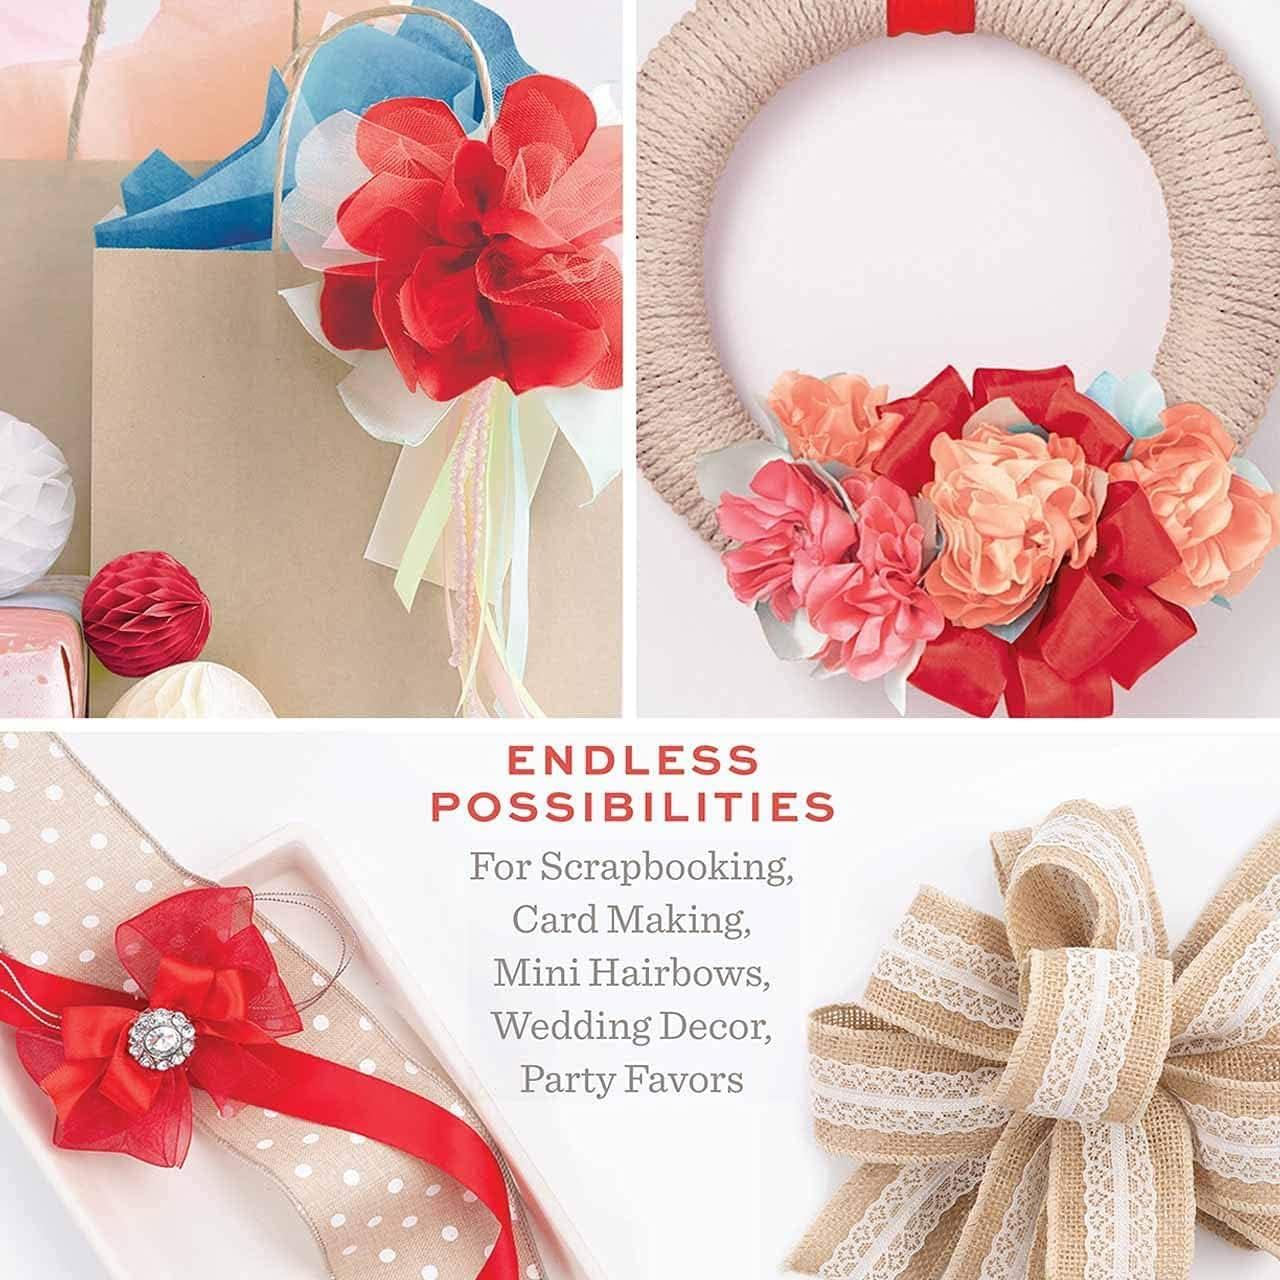 Easy to Make Wreath Bows with Bowdabra, Bowdabra